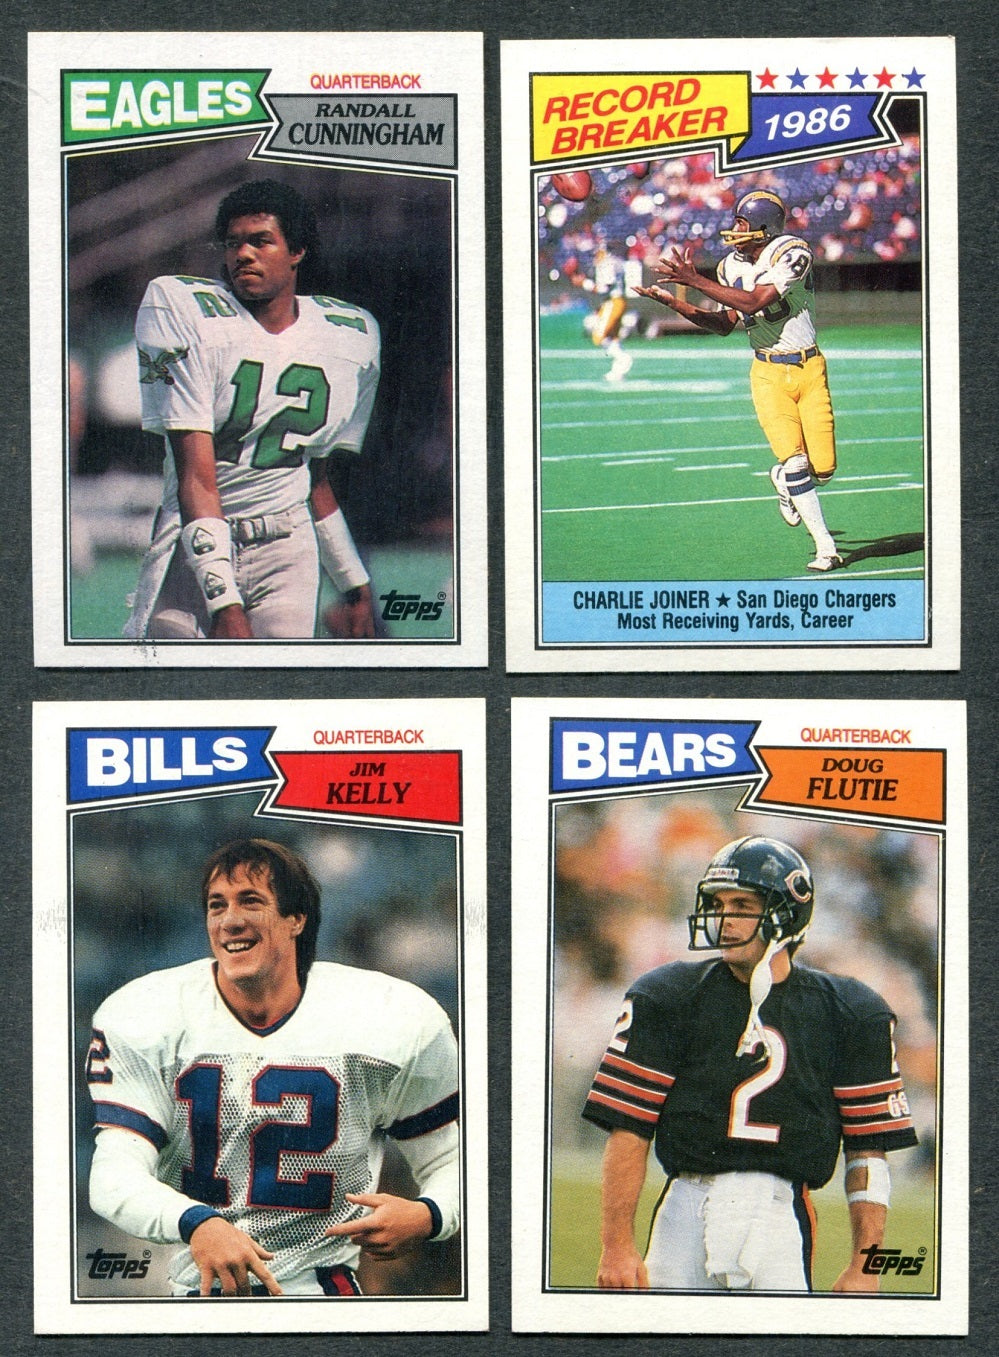 1987 Topps Football Complete Set NM NM/MT (396) (23-309)